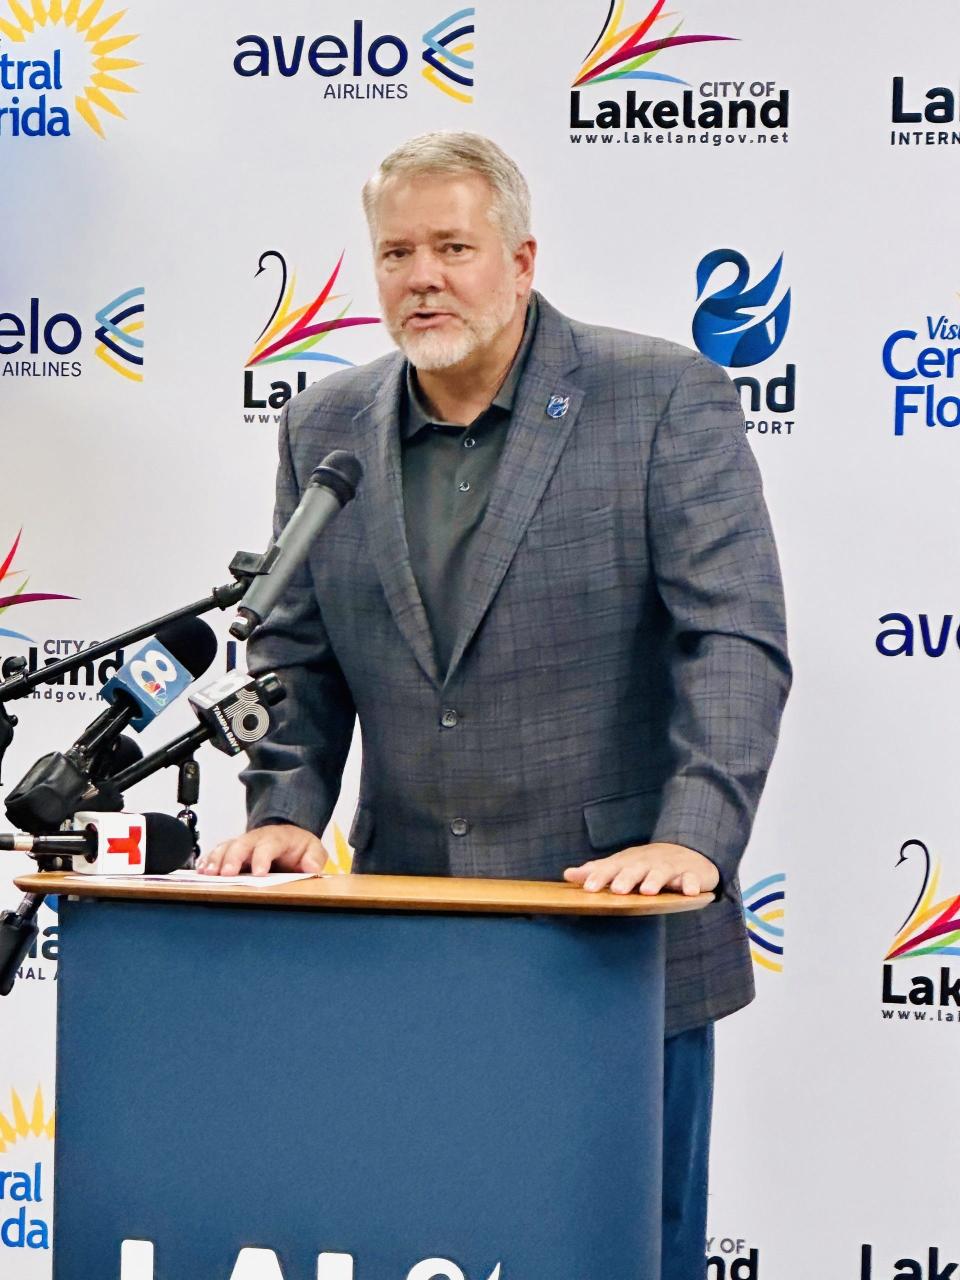 "We''ve actually been outperforming other larger metro areas in the statistics and data related to that initial flight," Lakeland City Manager Shawn Sherrouse said of Avelo's first month of operation in Lakeland.